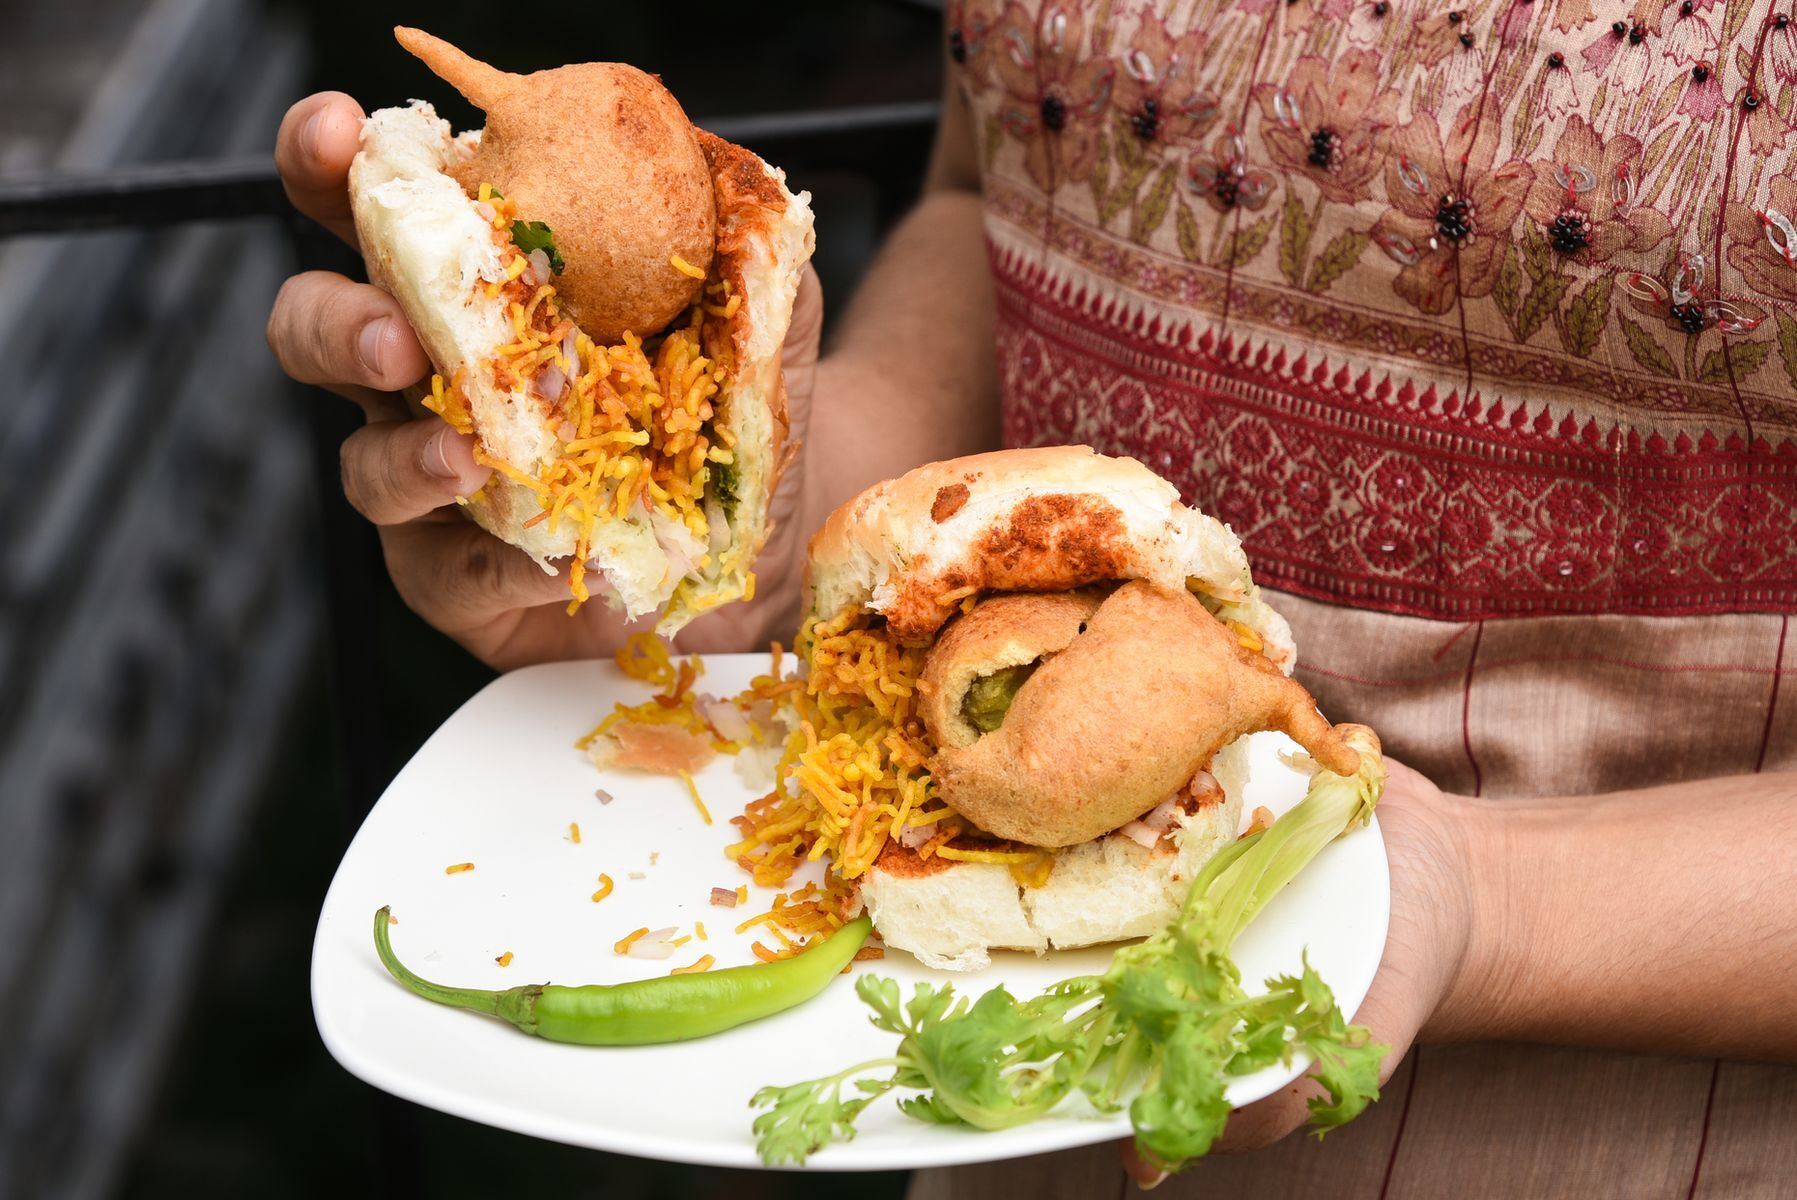 <p>Indians have no fear of carbs. After all, they popularized the famous potato sandwich. You heard that right! The vada pav is a <a href="https://food.ndtv.com/food-drinks/vada-pav-history-of-this-massy-mumbai-snack-would-make-you-want-to-grab-one-right-now-2012995" rel="noreferrer noopener">soft bread roll spread with chutney and filled with a ball of fried mashed potatoes</a>.</p>